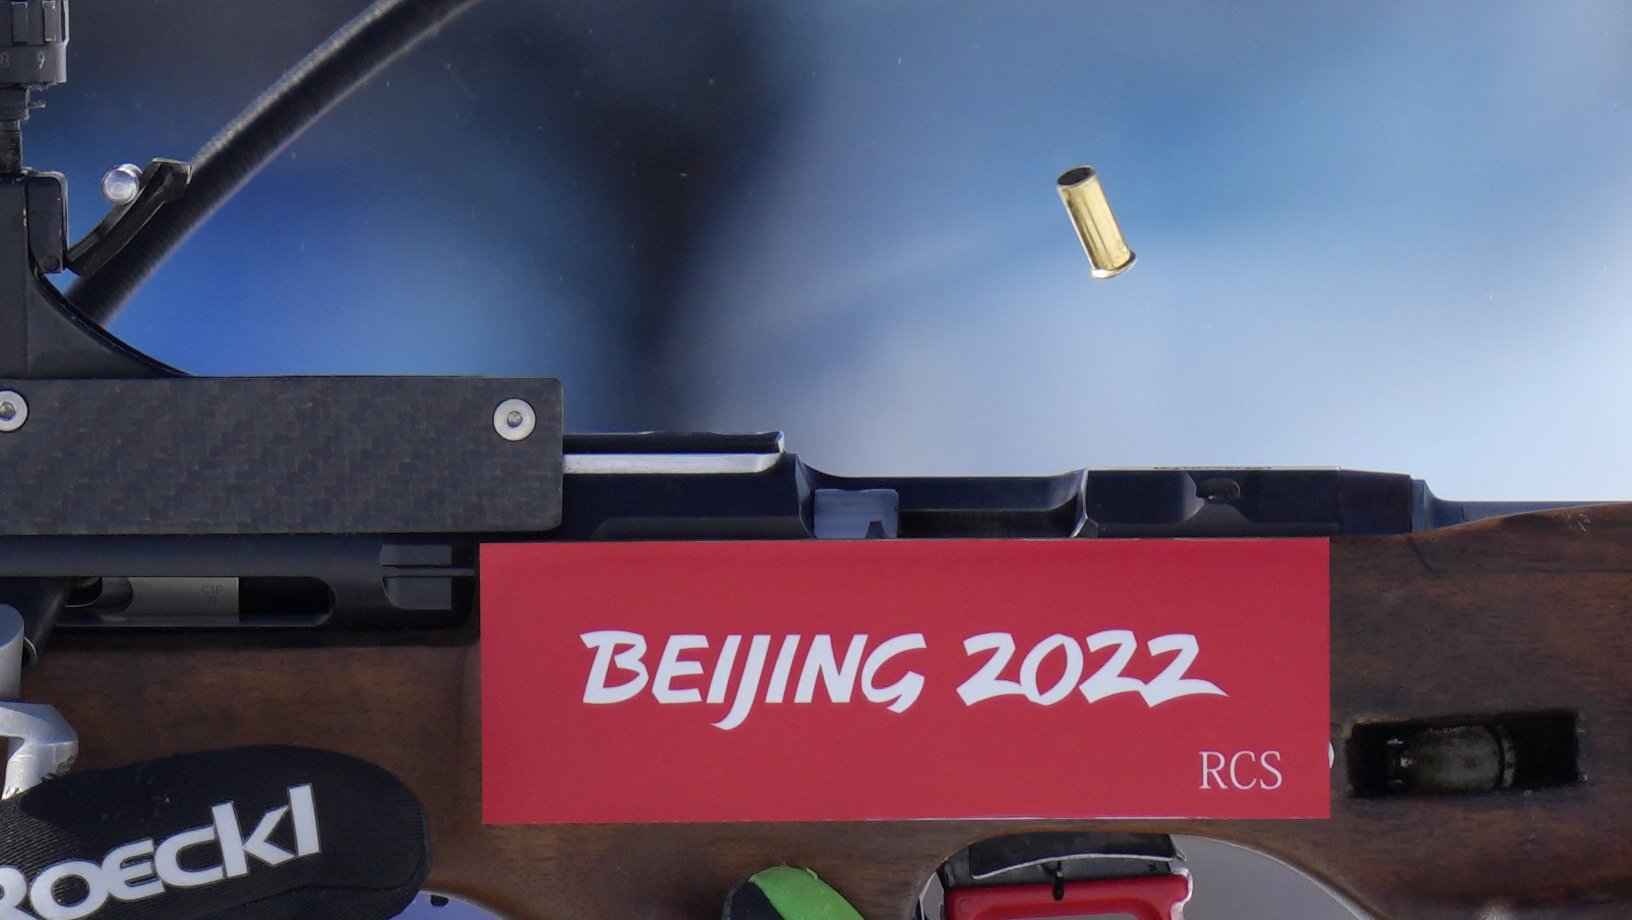  A shell casing is ejected during biathlon target shooting at the 2022 Winter Olympics, Friday, Feb. 4, 2022, in Zhangjiakou, China. (AP Photo/Kirsty Wigglesworth) 